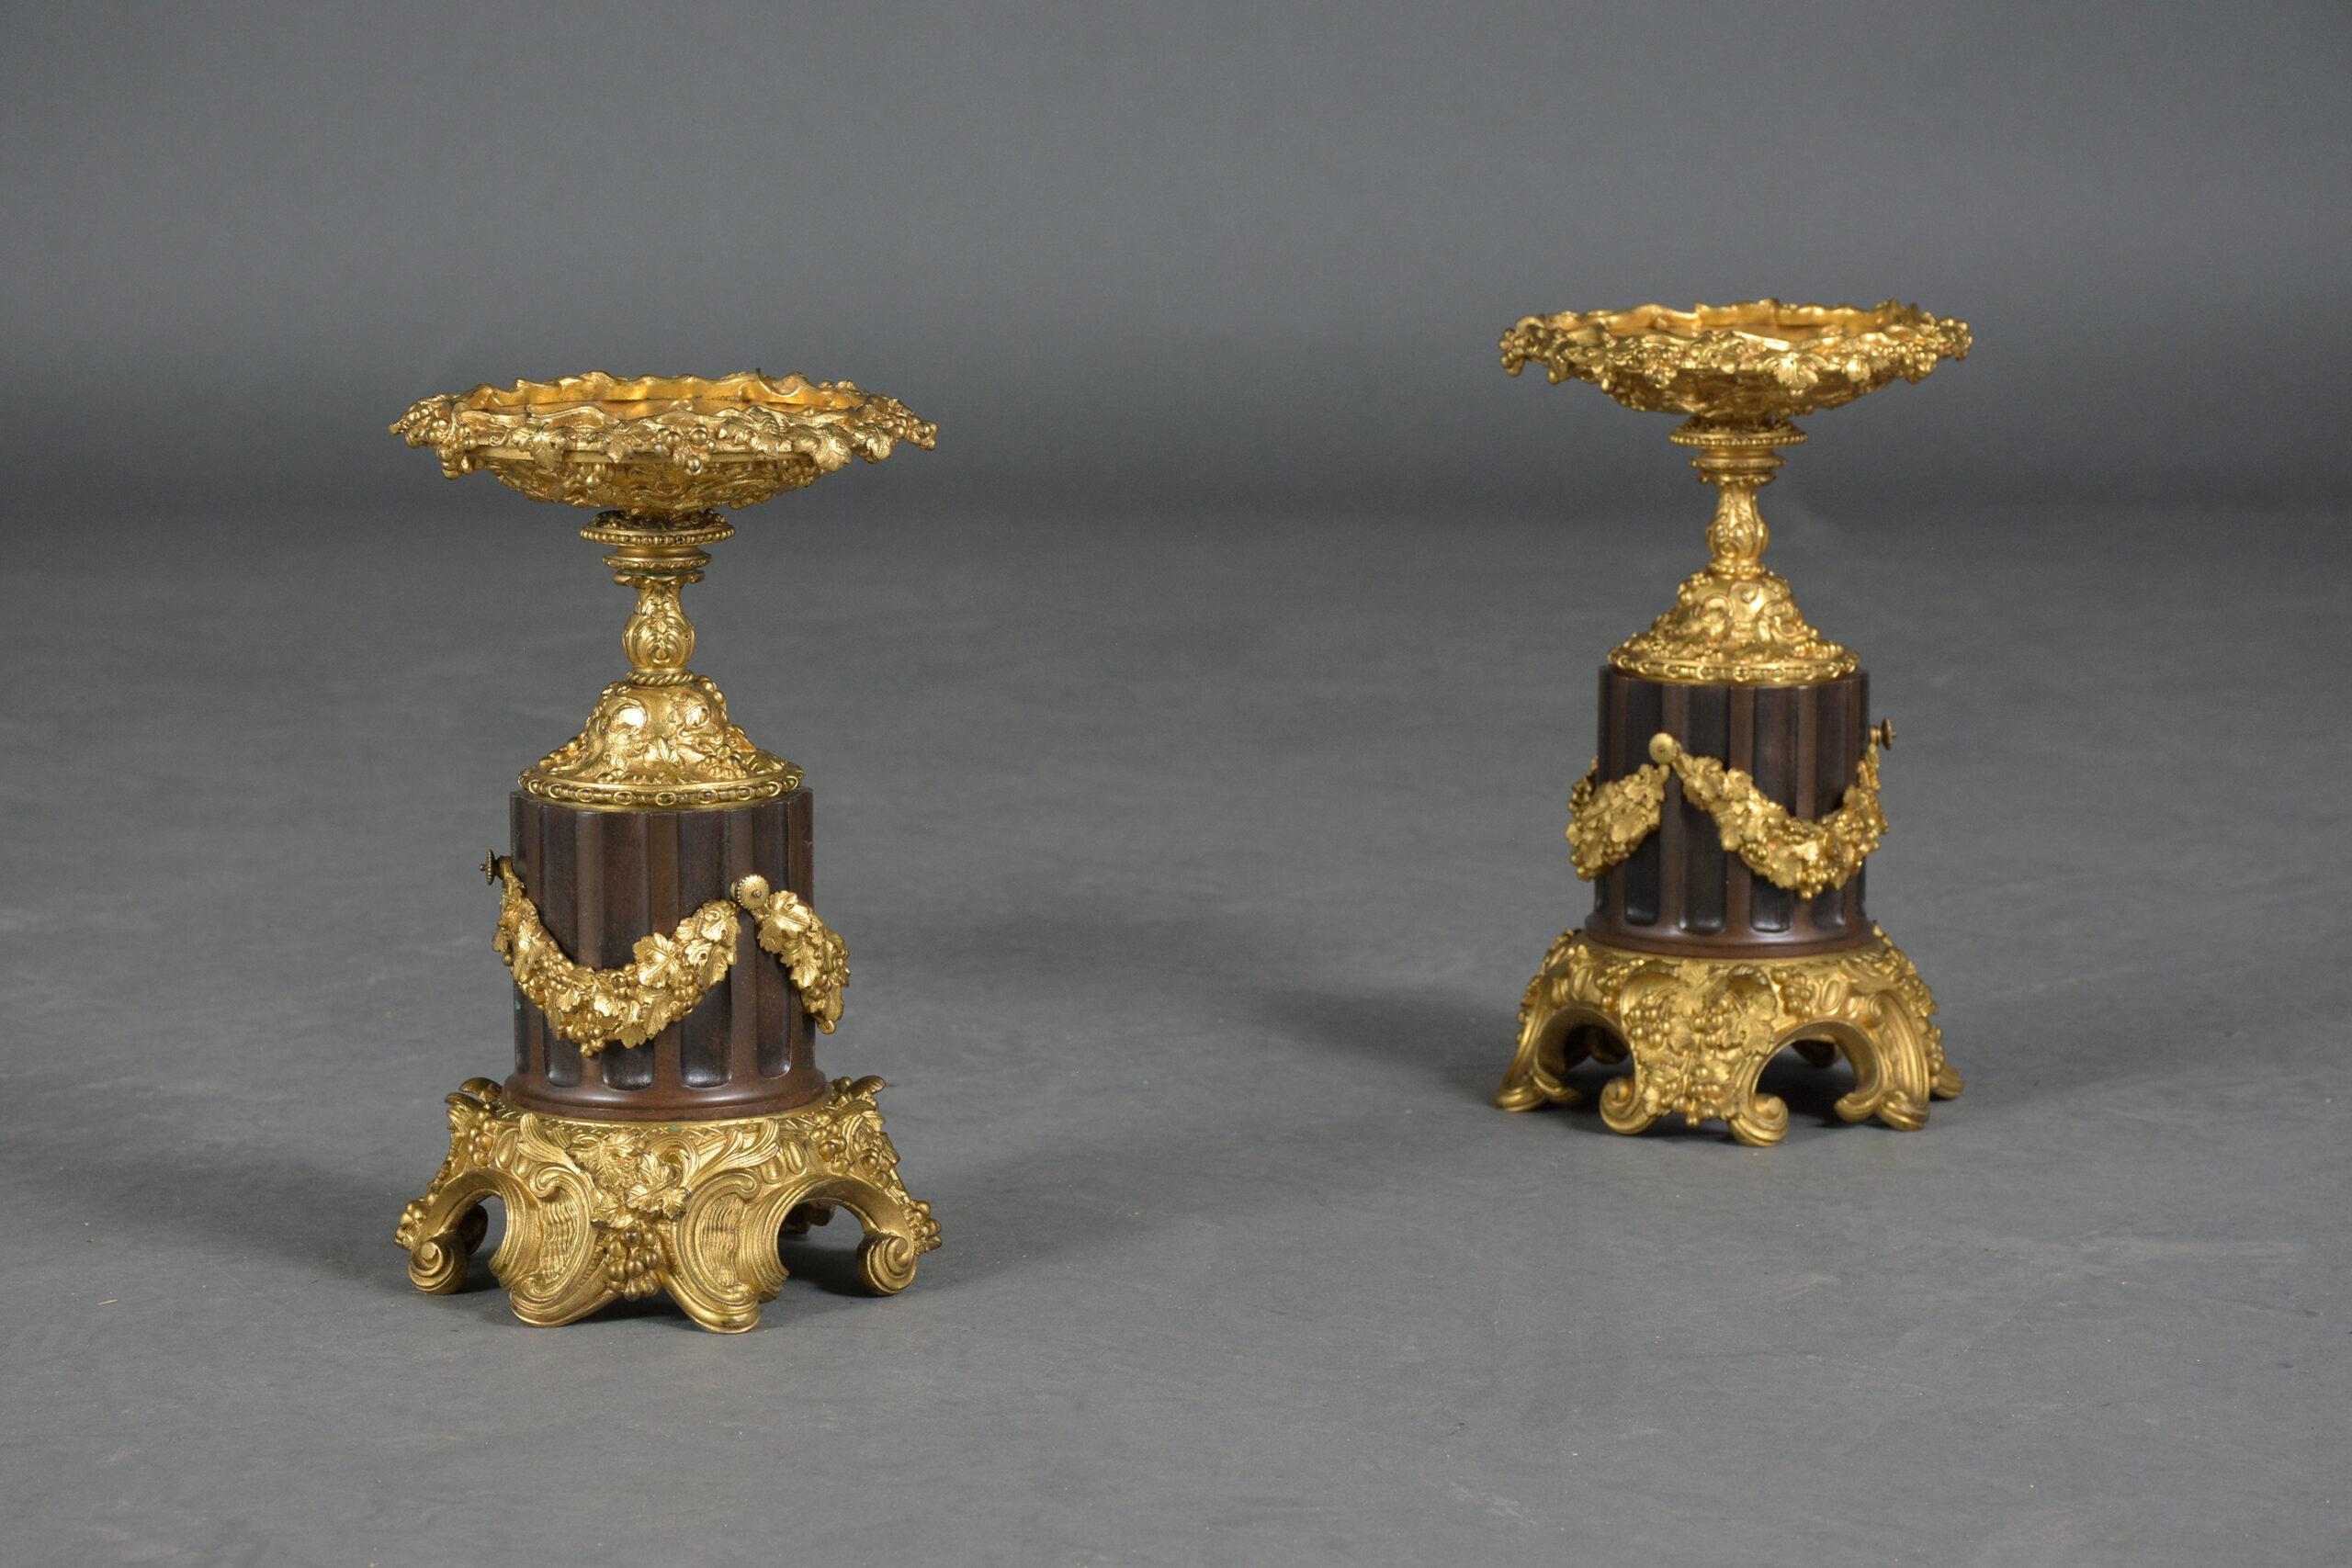 Step into the world of classical elegance with our exquisite pair of Early 19th-century French Urns, masterpieces of craftsmanship and historical beauty. These antique cassolettes, crafted from bronzed material, have been professionally restored by